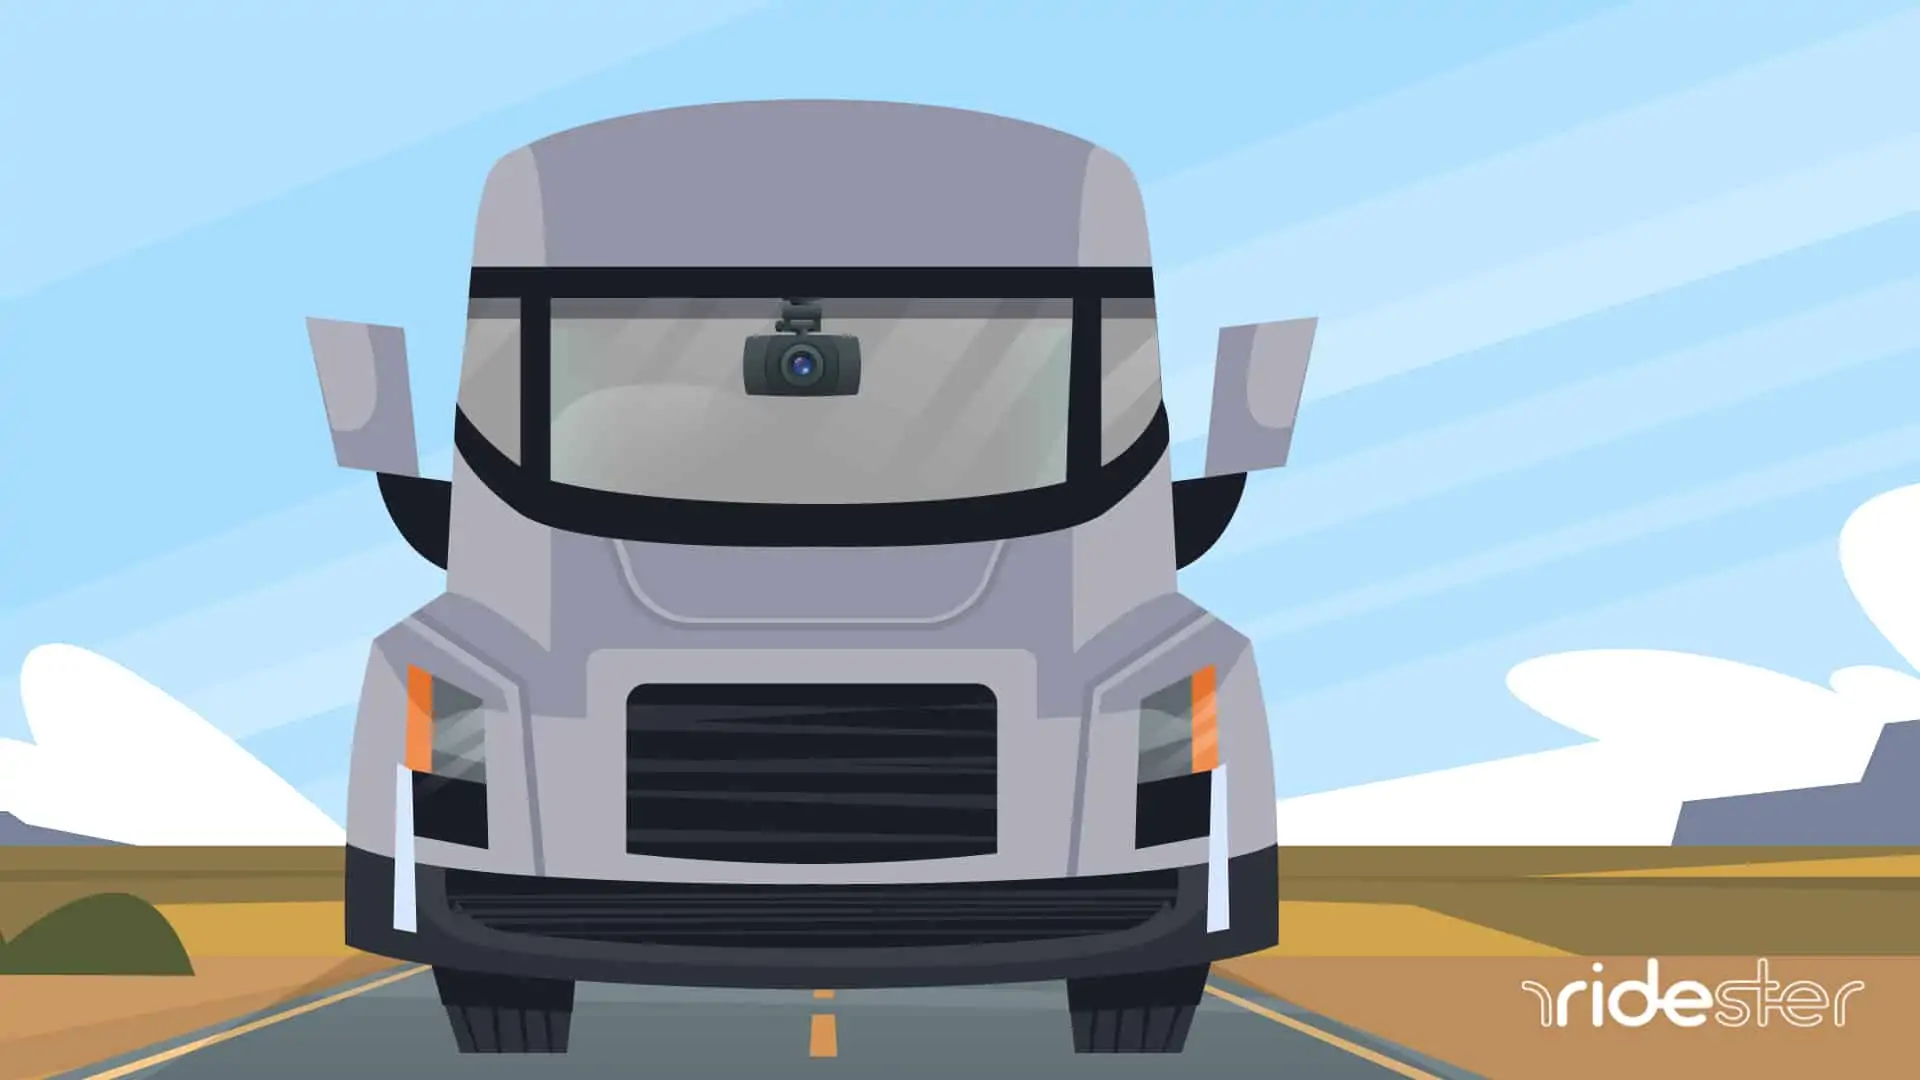 Top 5 Dash Cams for Truck Drivers in 2019